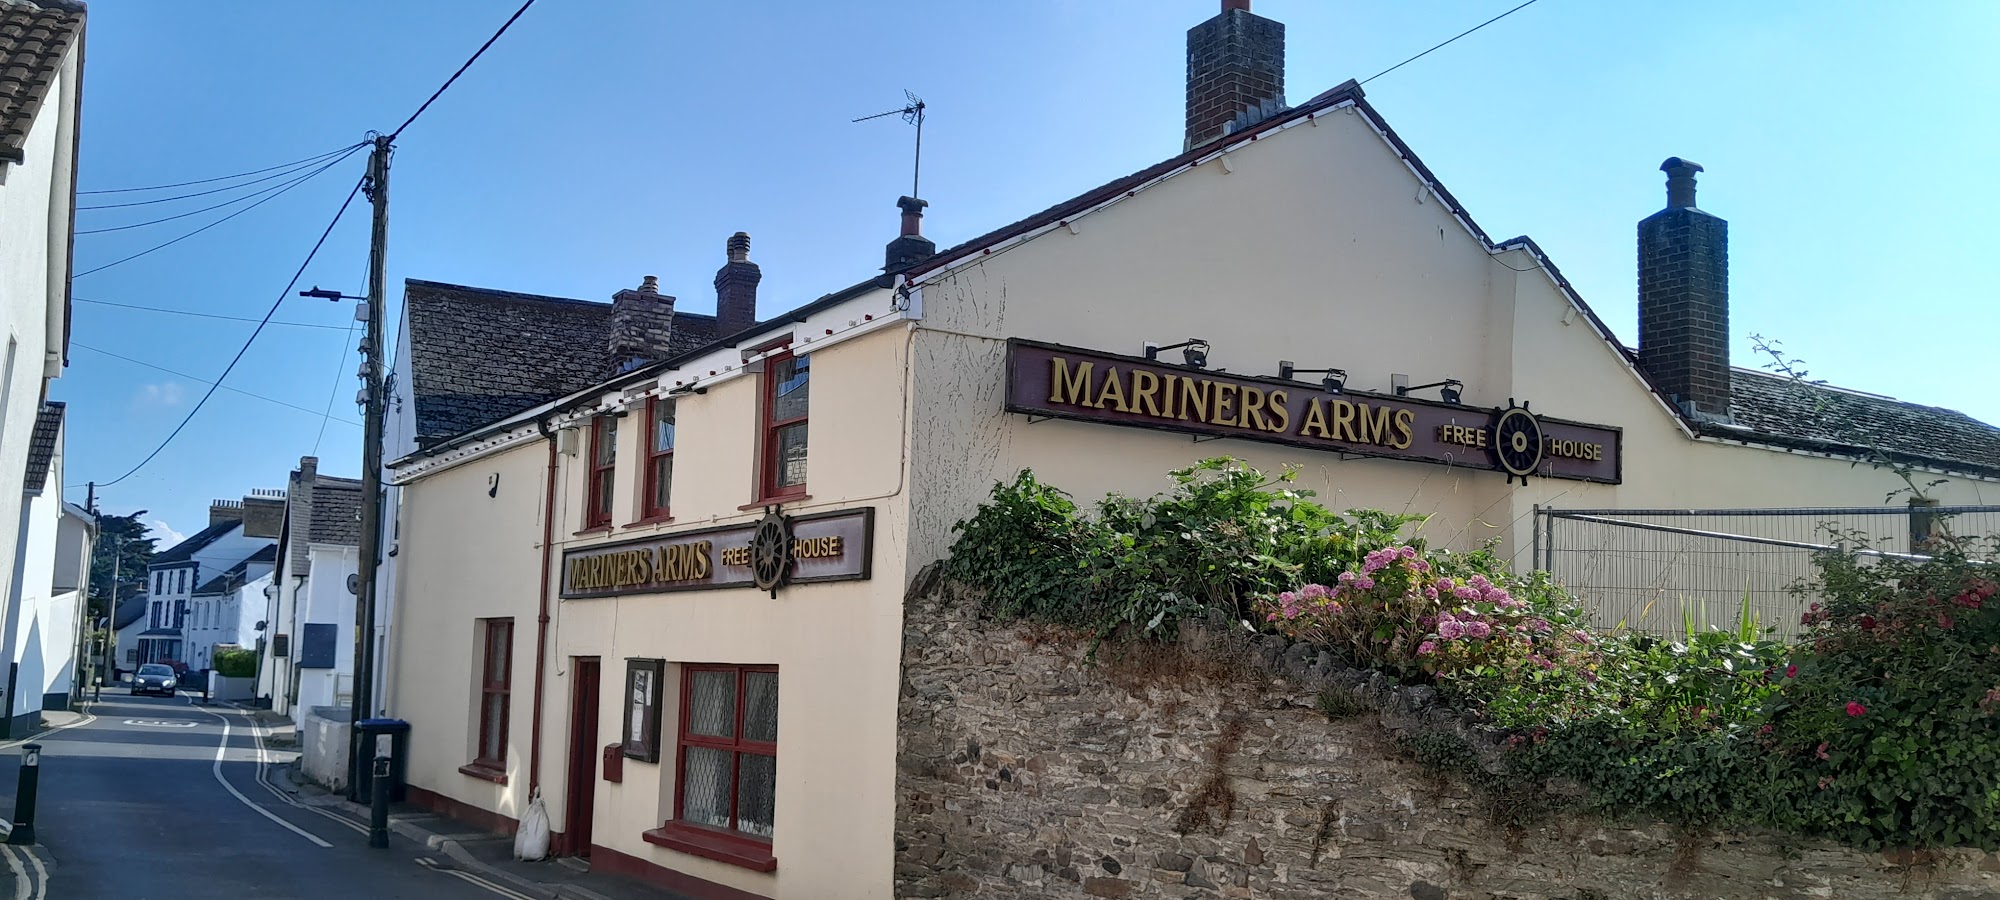 The Mariners Arms